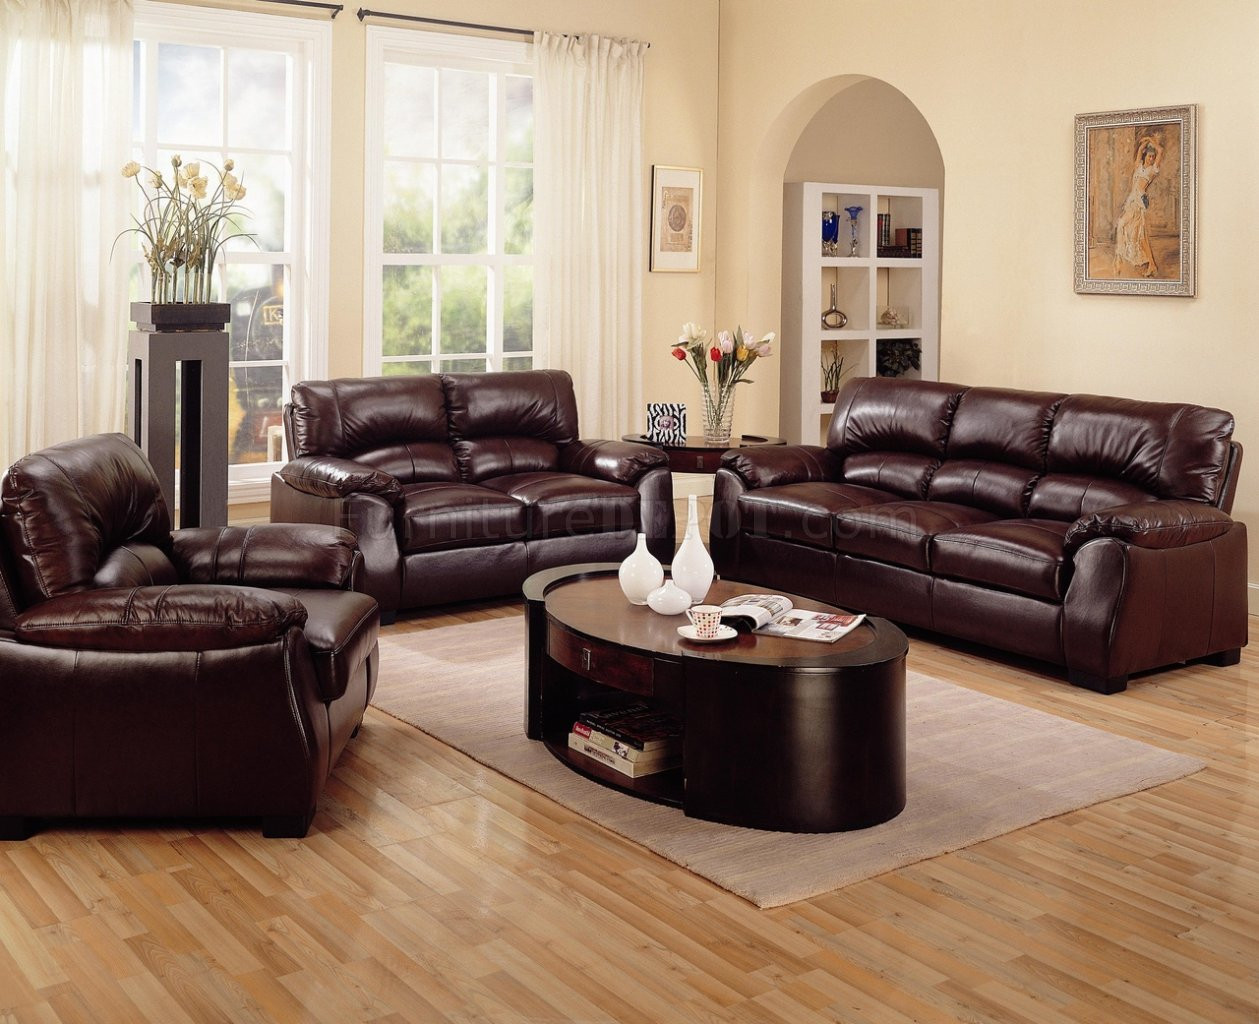 Brown Furniture Living Room Ideas
 Rich Brown Leather Match Contemporary Living Room Sofa w